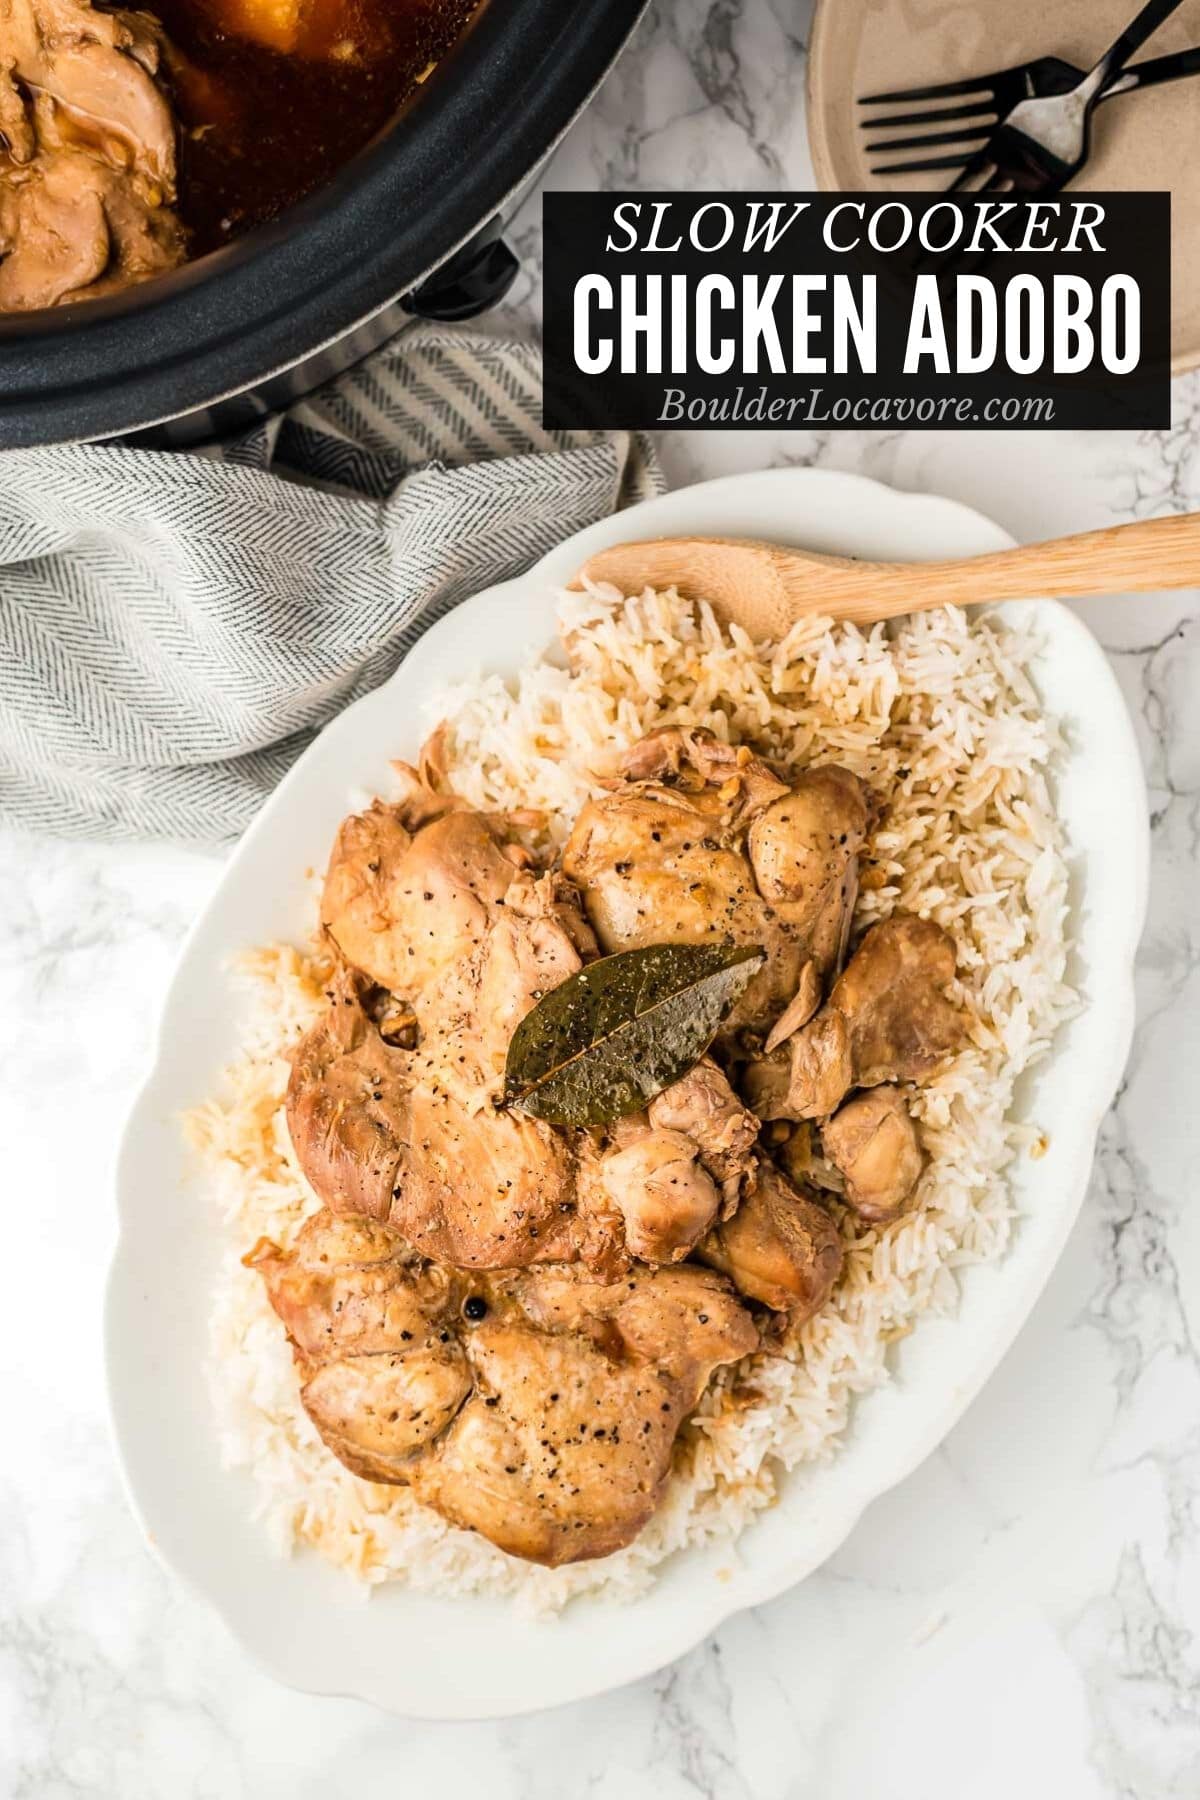 CHICKEN ADOBO TITLE IMAGE